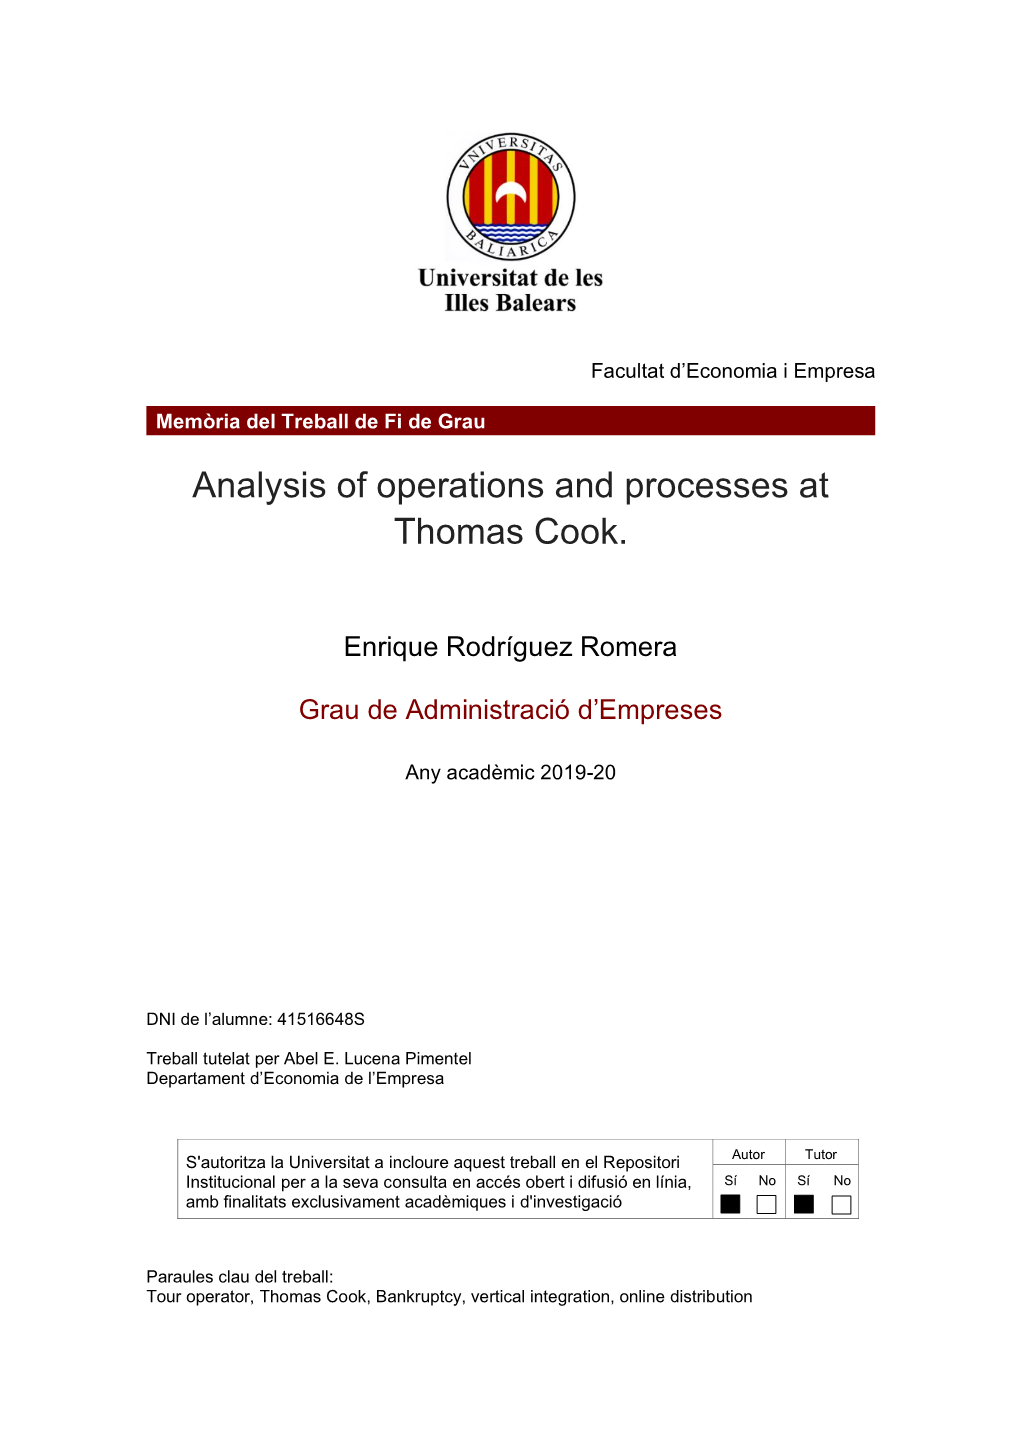 Analysis of Operations and Processes at Thomas Cook